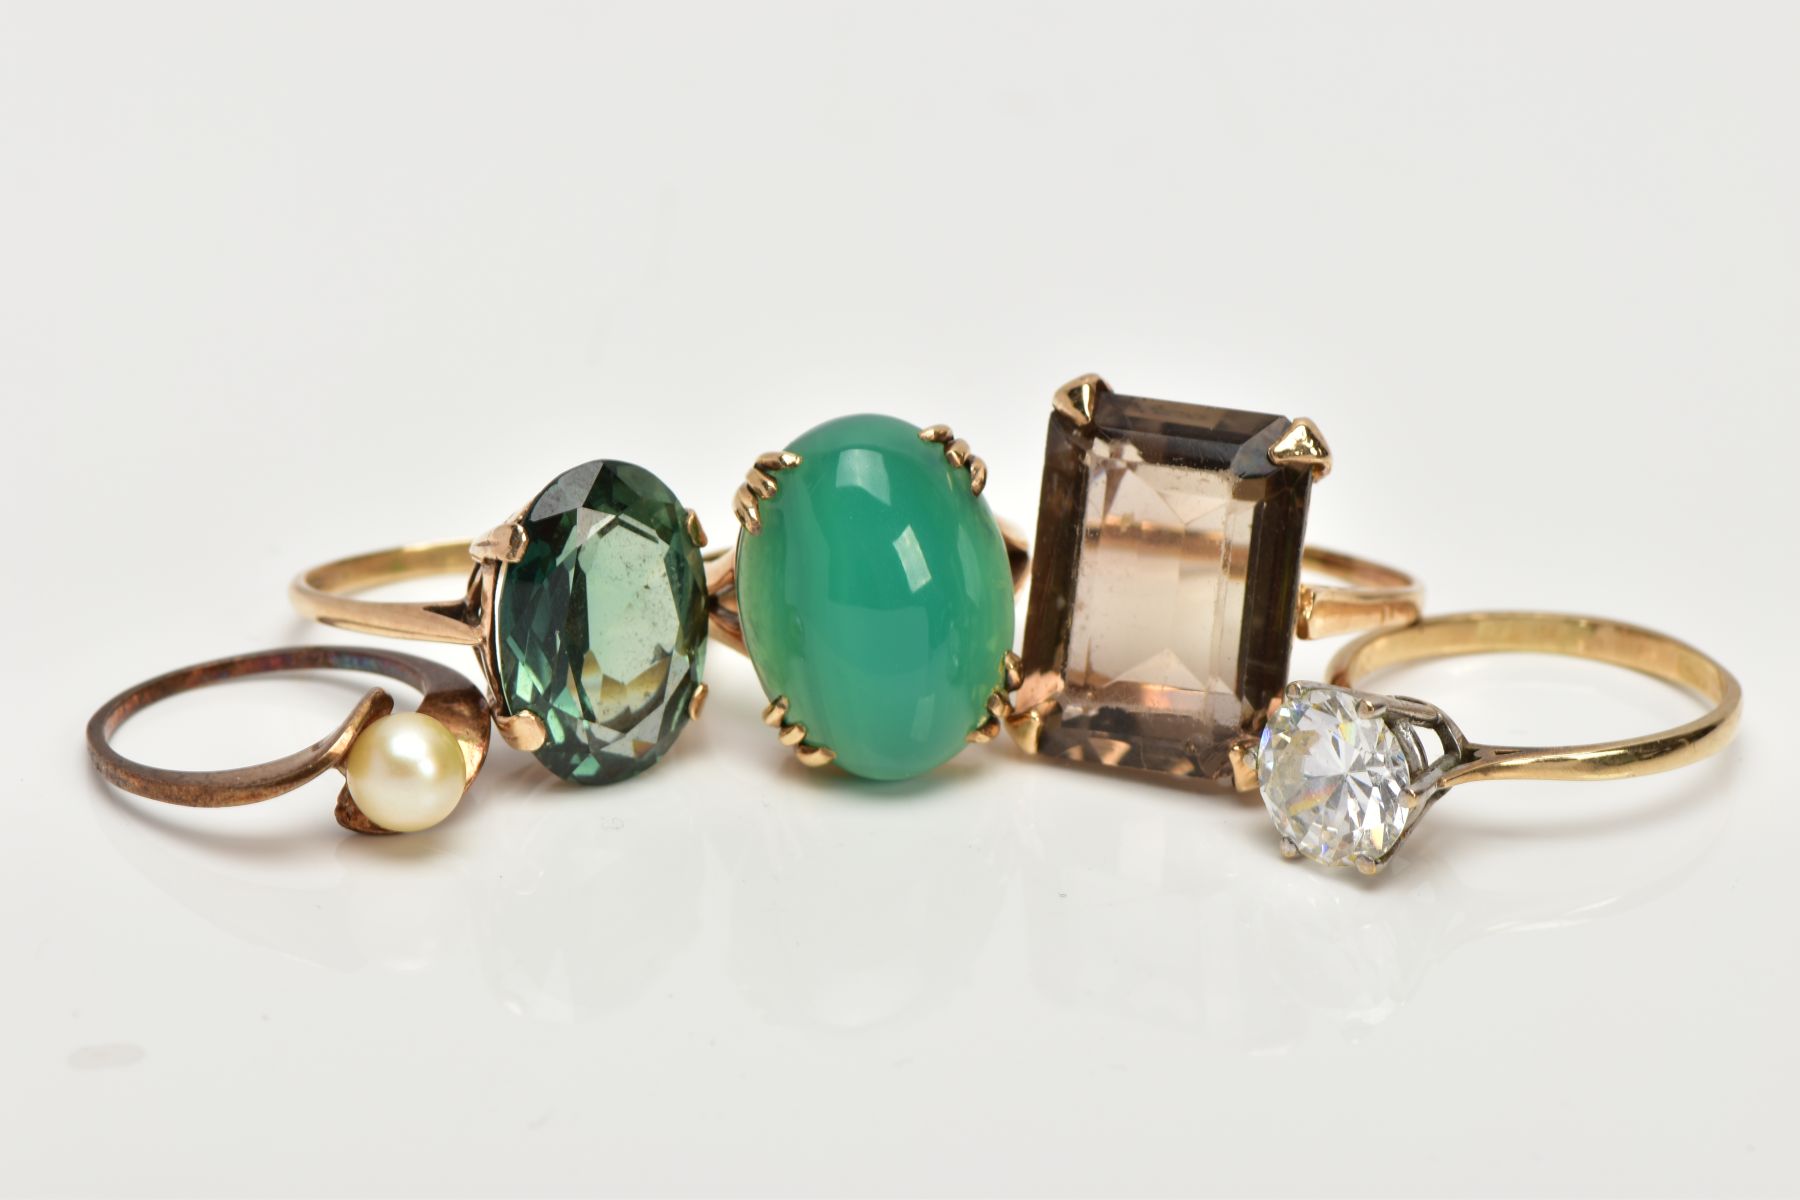 FIVE MODERN DRESS RINGS, all hallmarked or stamped '9ct', to include a large Citrine, a dyed green